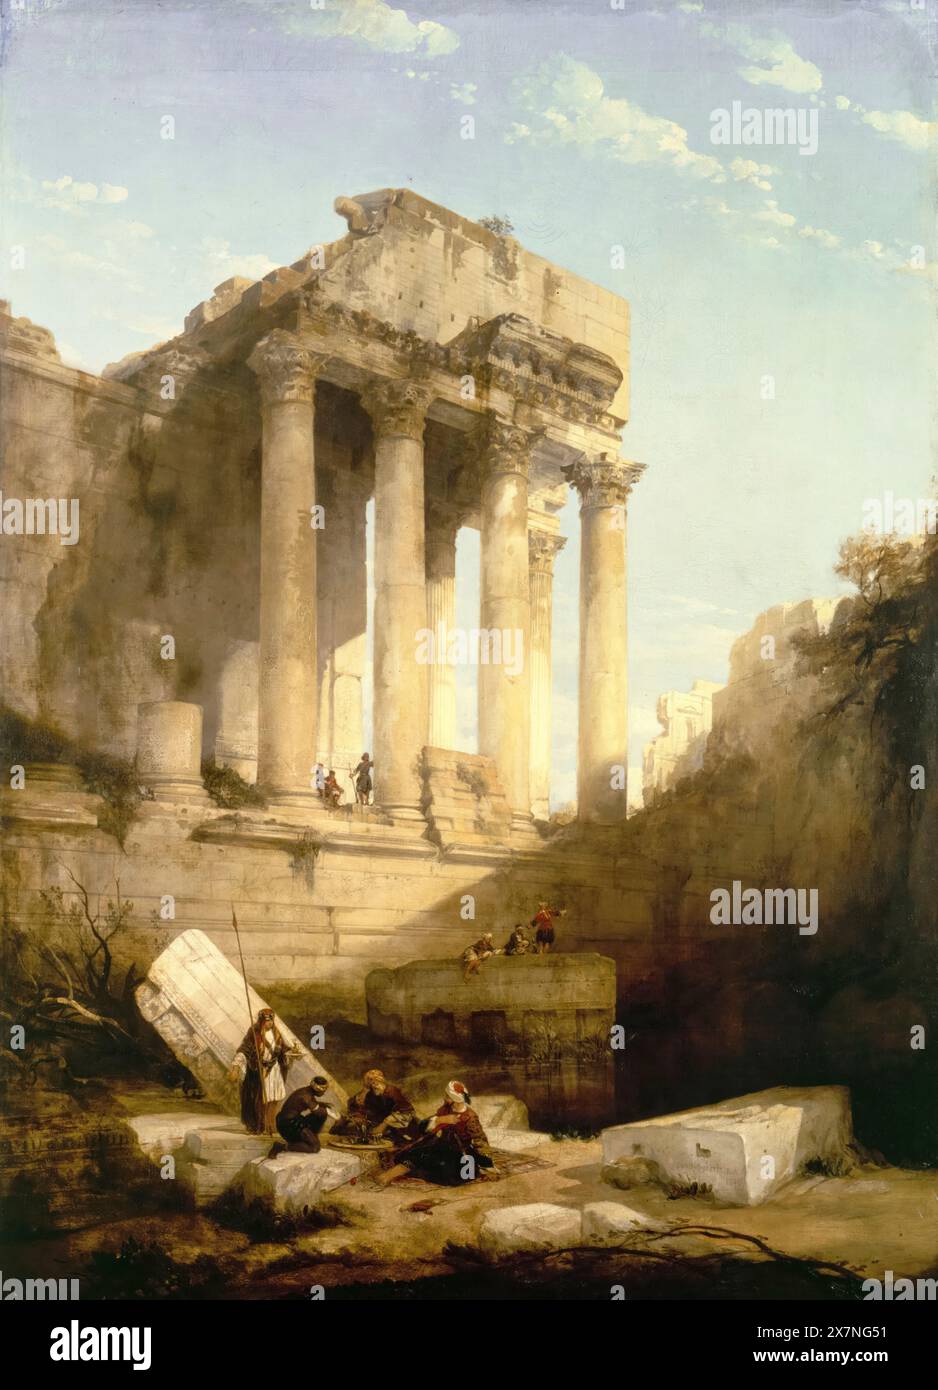 David Roberts, Baalbec: Ruins of the Temple of Bacchus, painting in oil on canvas, 1840 Stock Photo